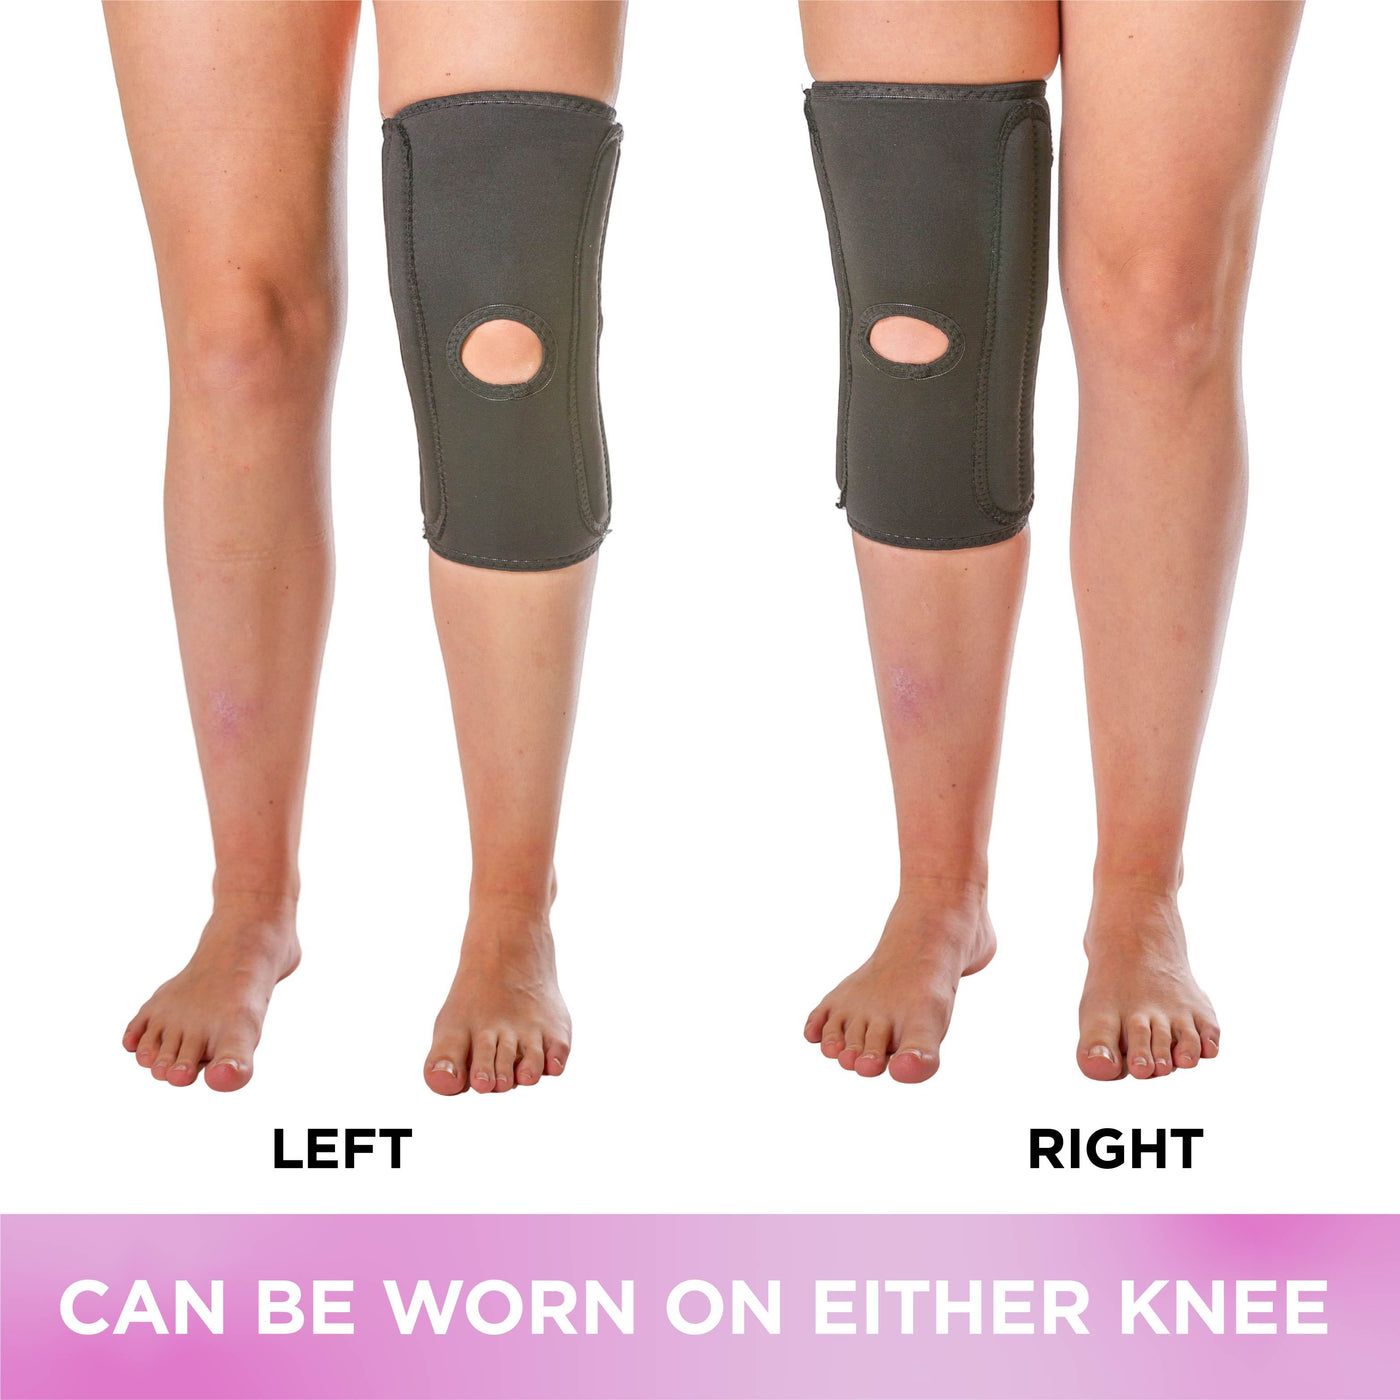 Worn on your right or left knee, the sleeve works as a 360 compression knee brace